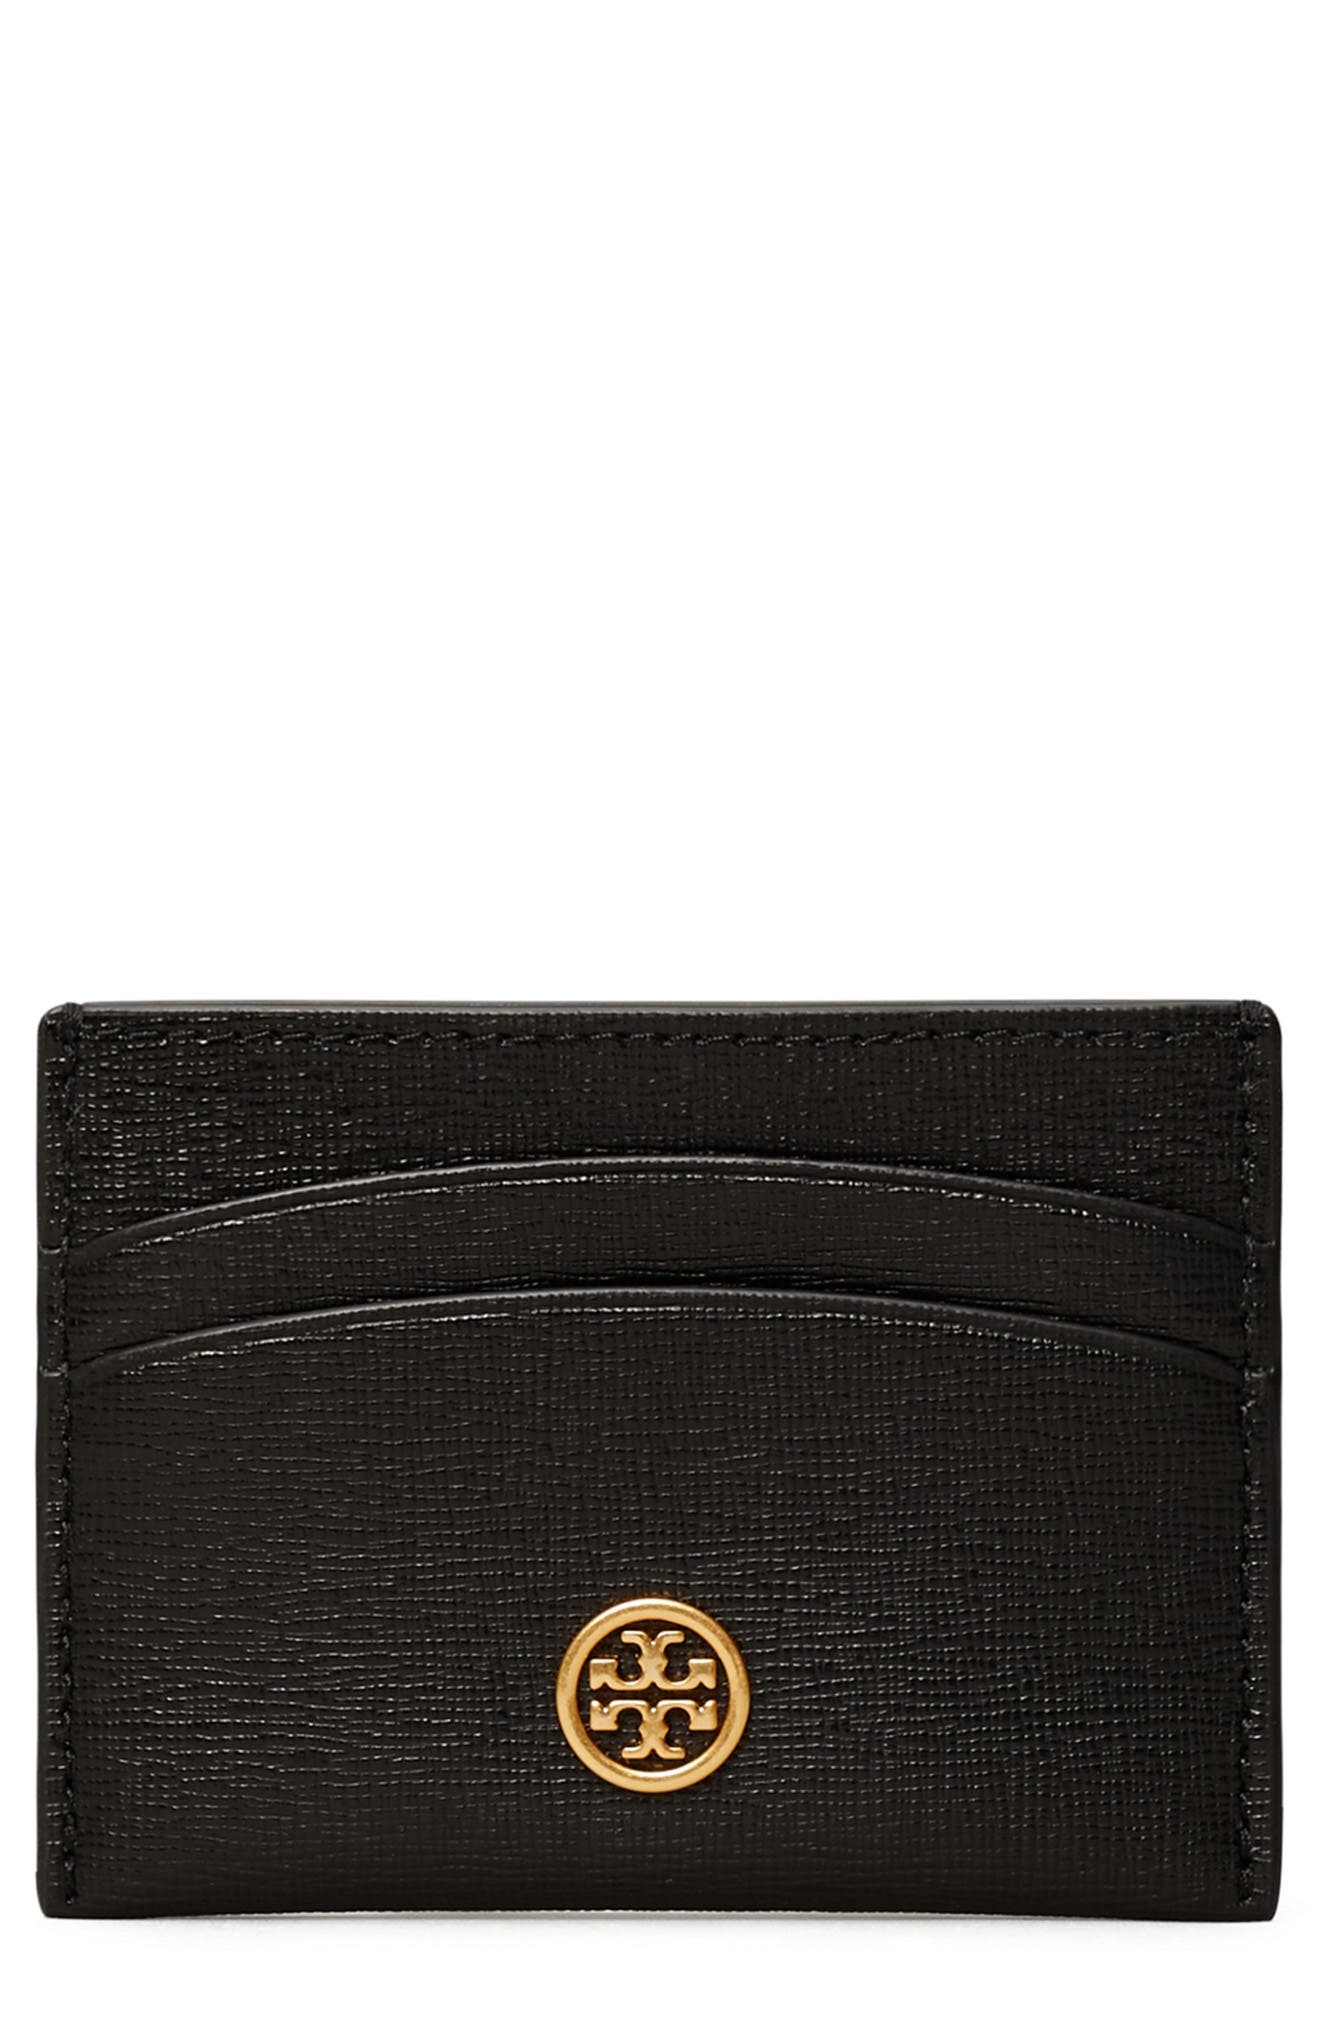 Tory Burch Robinson Leather Card Case in Black at Nordstrom